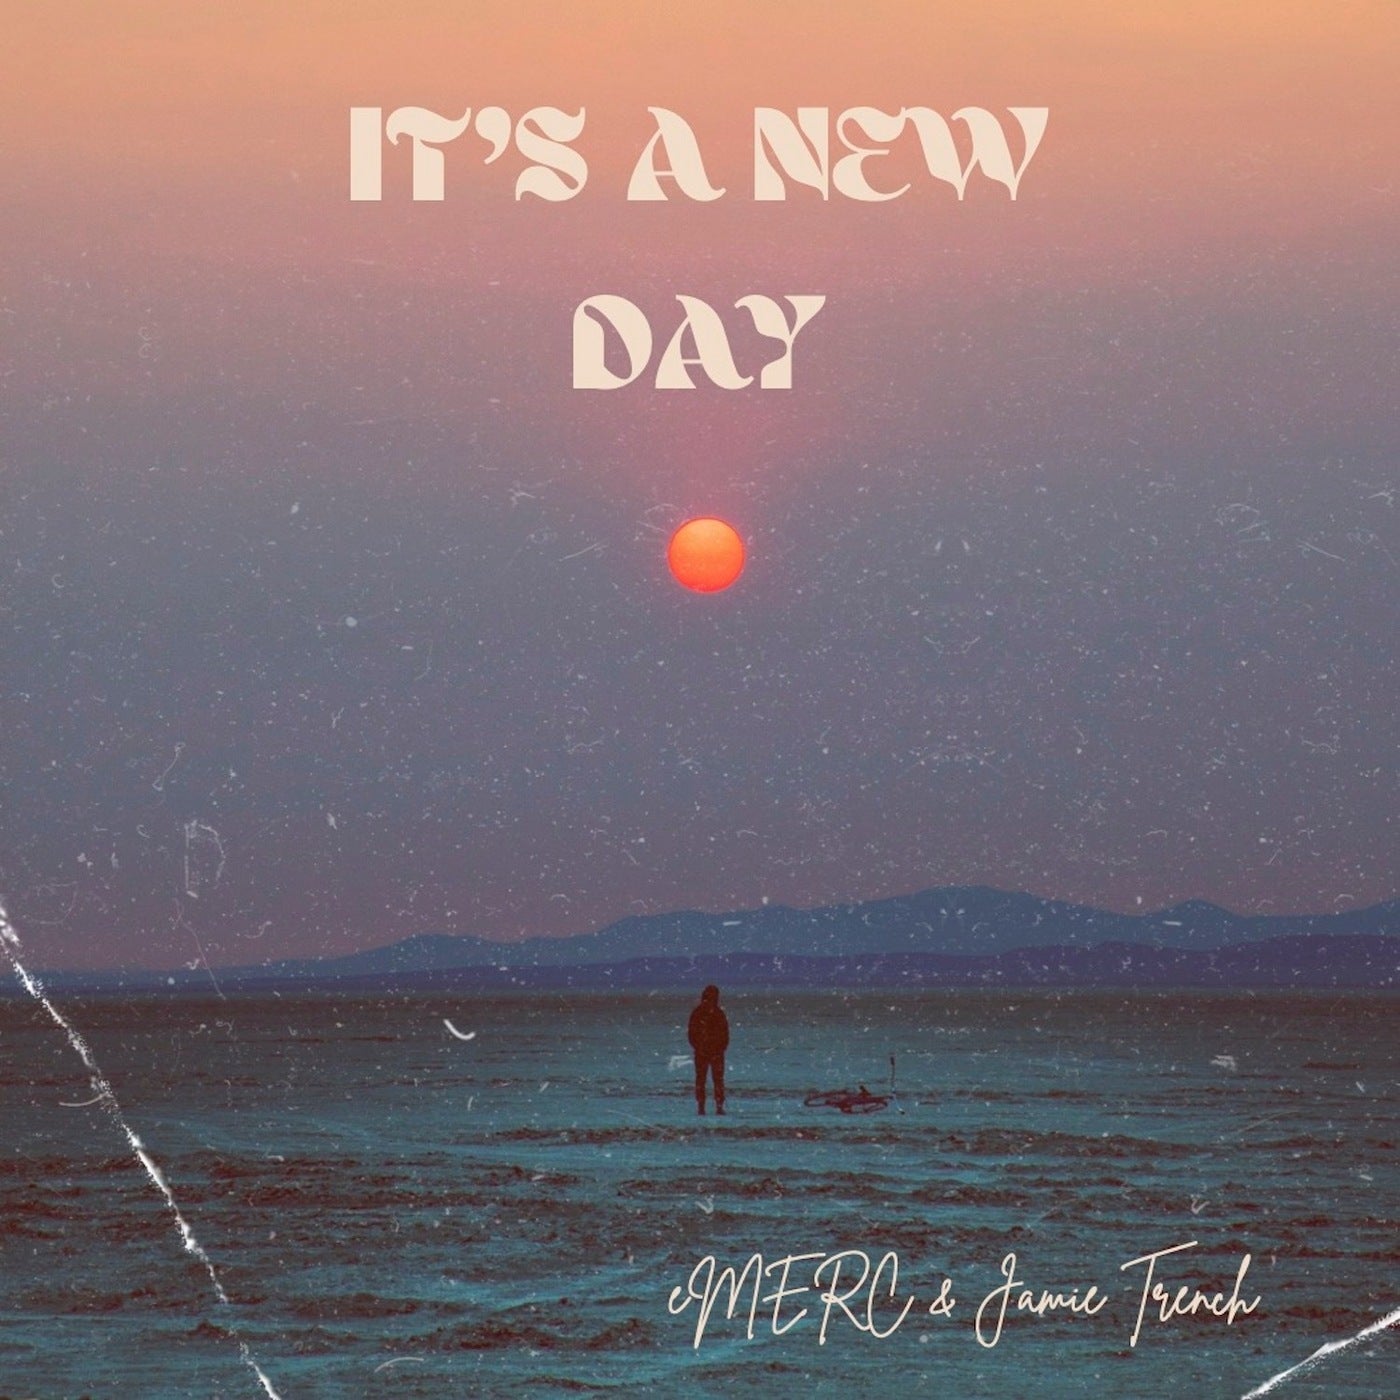 It's A New Day